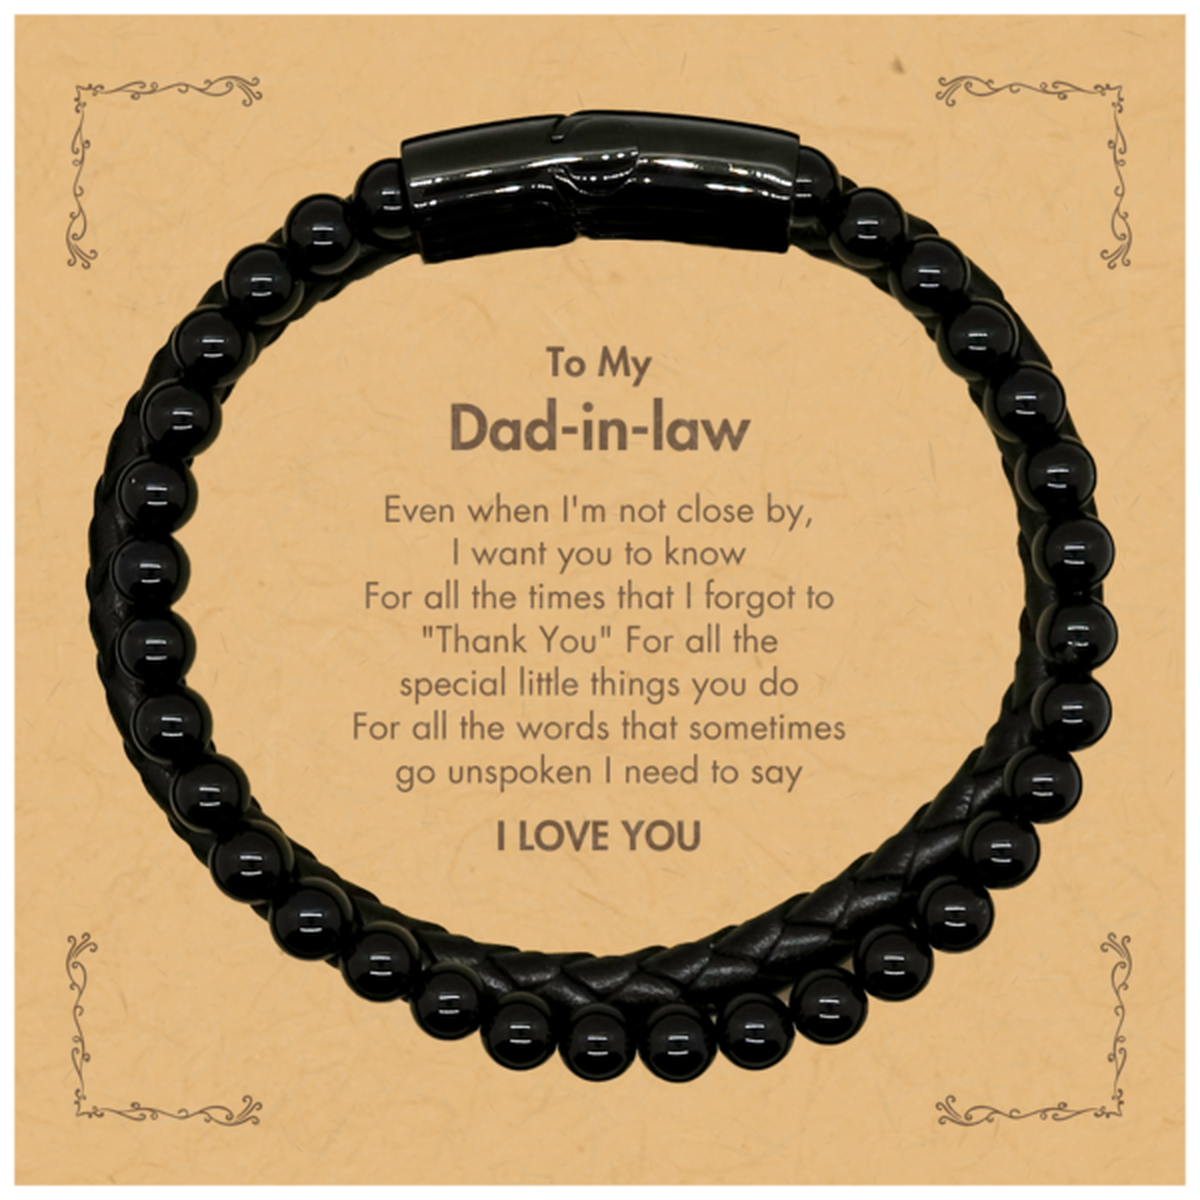 Thank You Gifts for Dad-in-law, Keepsake Stone Leather Bracelets Gifts for Dad-in-law Birthday Mother's day Father's Day Dad-in-law For all the words That sometimes go unspoken I need to say I LOVE YOU